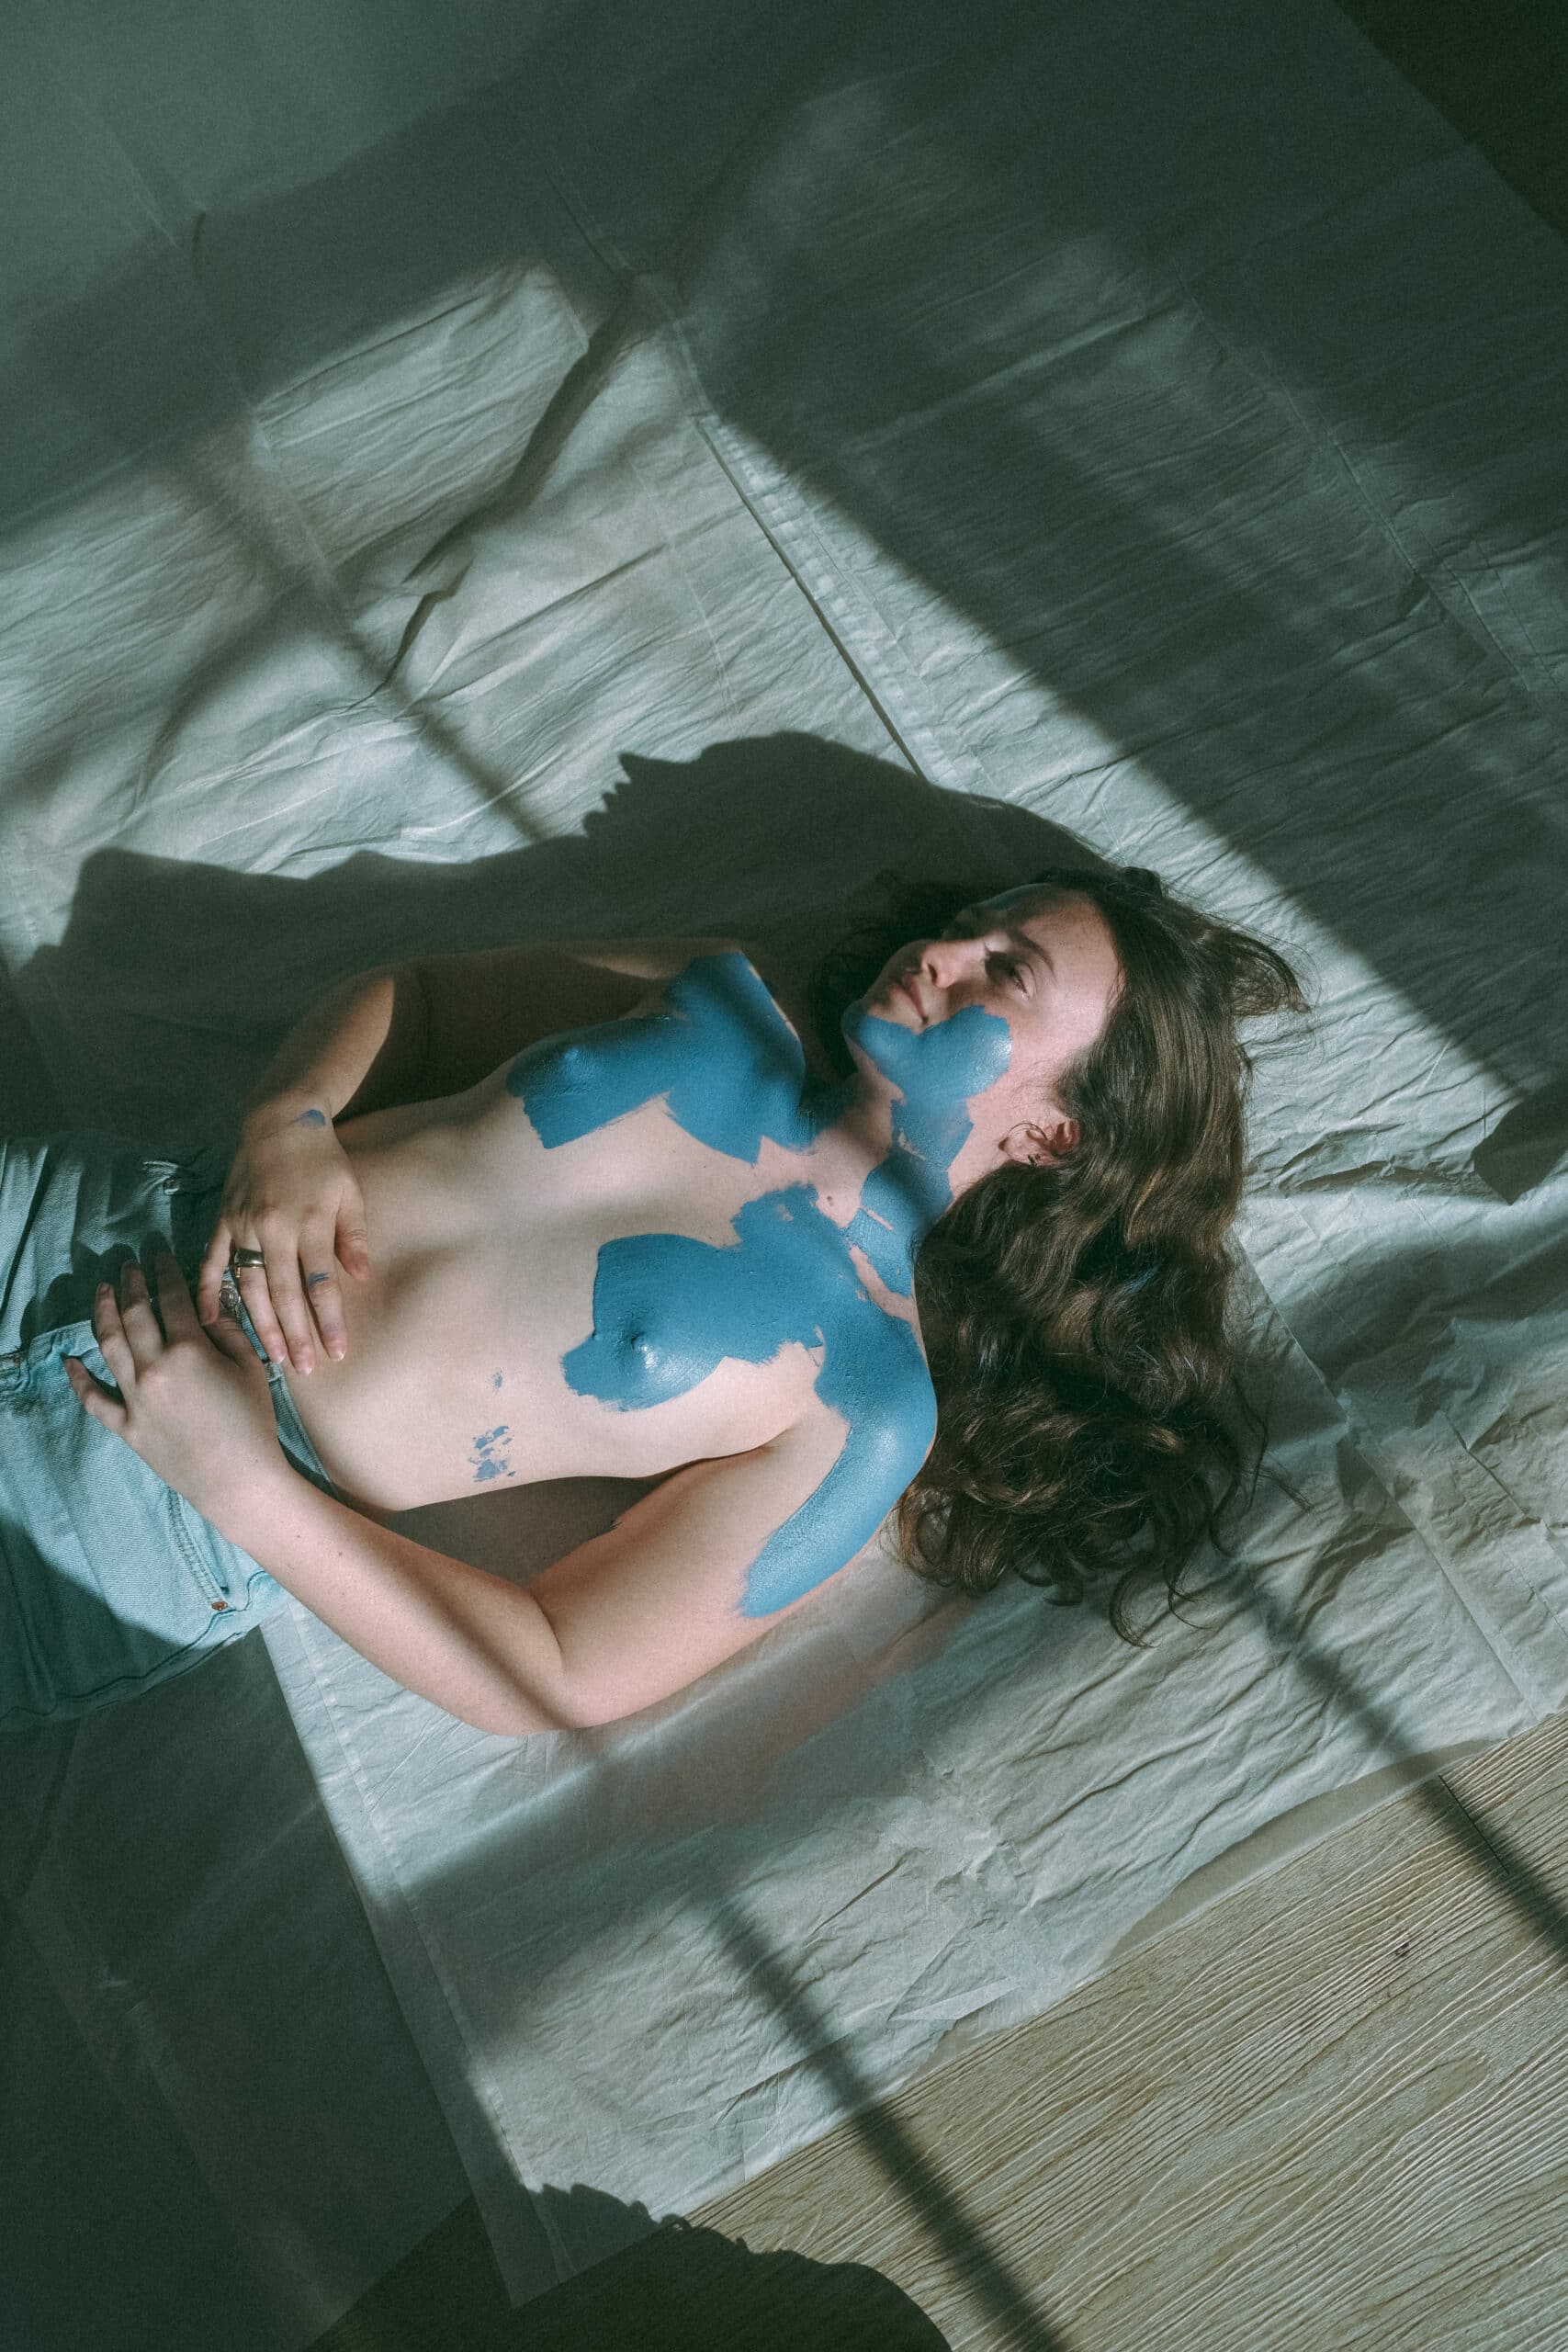 topless woman during a creative model photoshoot laying on the floor with shadows on her painted body